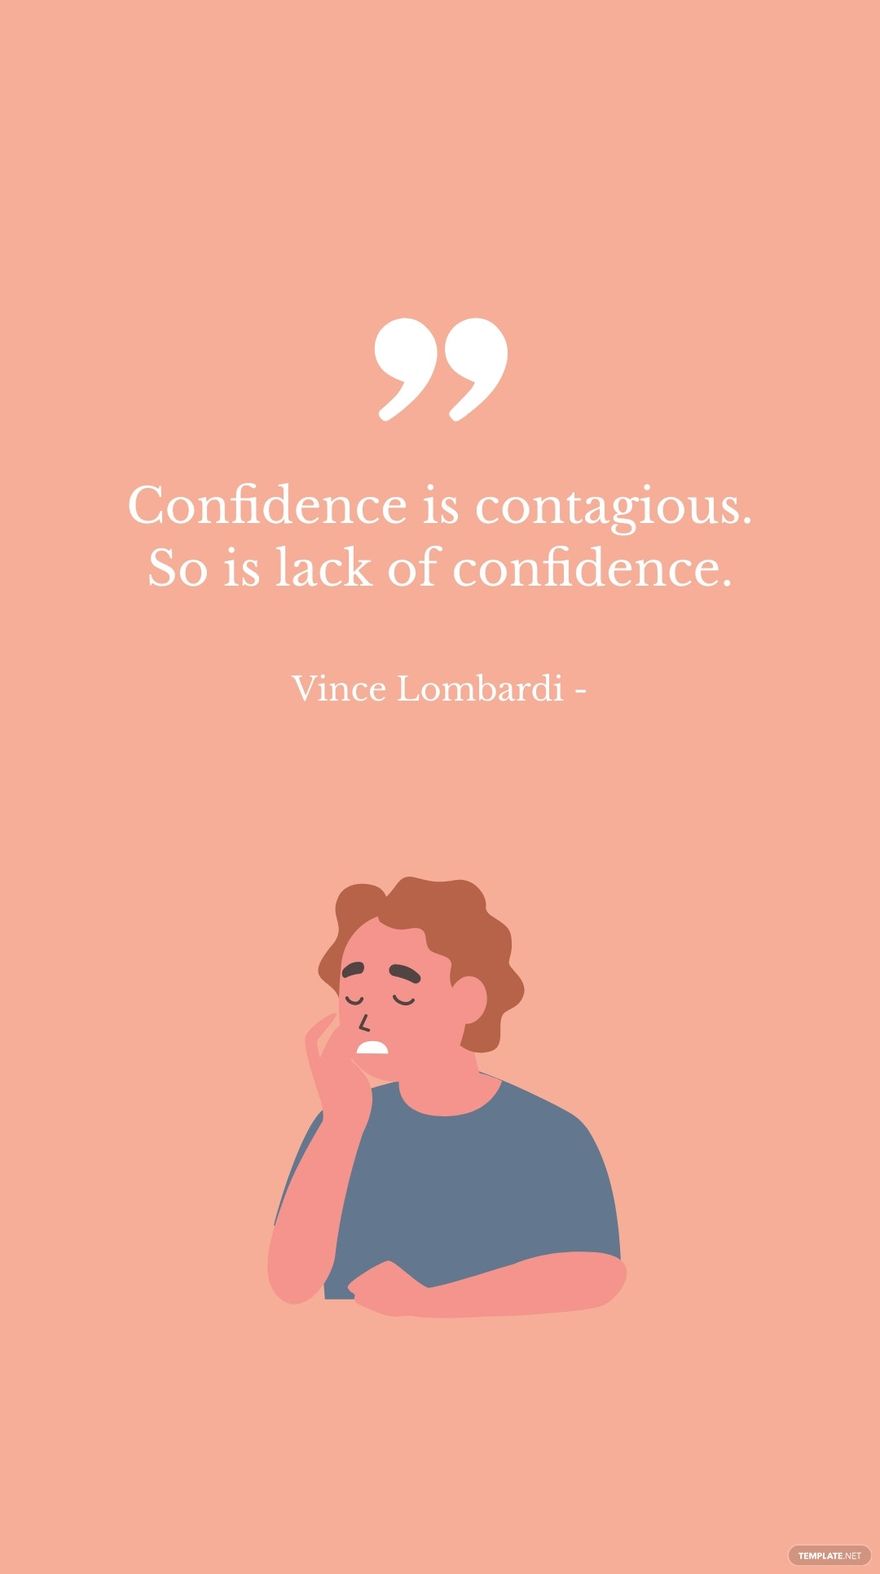 Vince Lombardi - Confidence is contagious. So is lack of confidence.